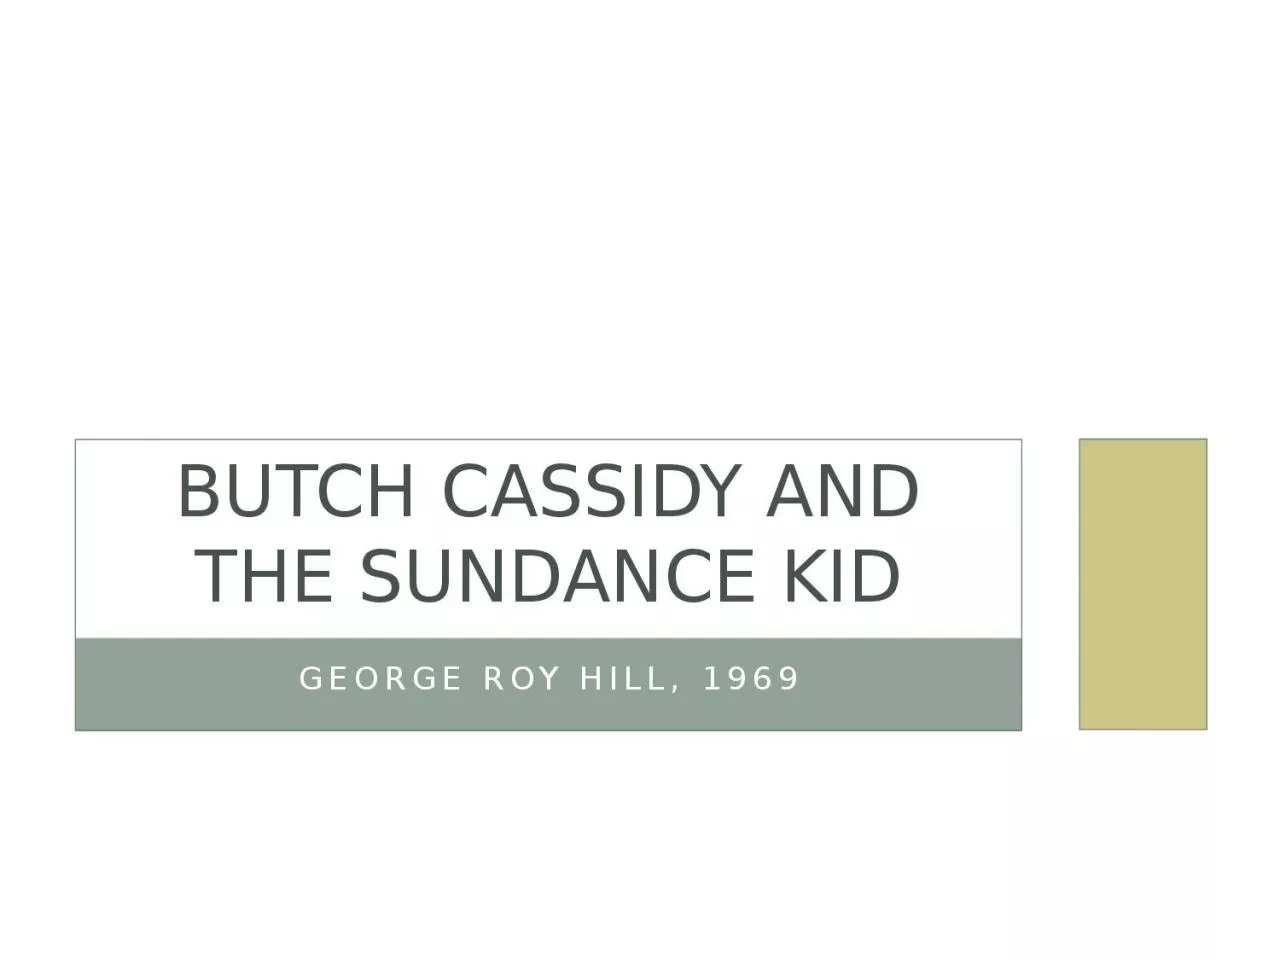 George Roy Hill, 1969 Butch Cassidy and the Sundance Kid